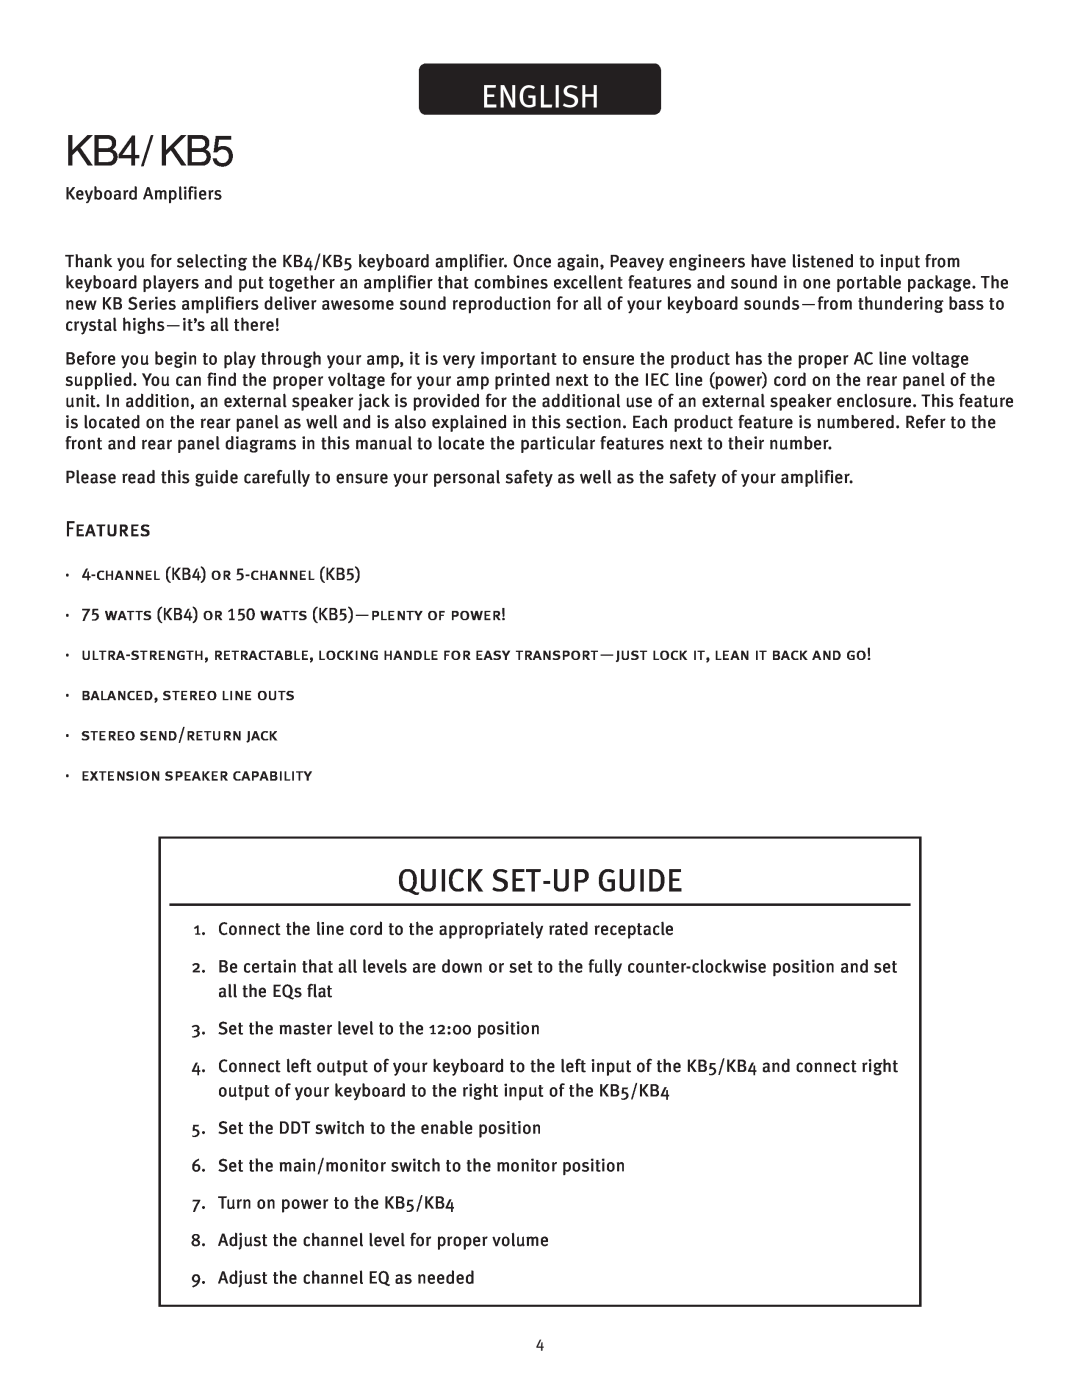 Peavey KB4/KB5 owner manual English, Quick Set-Up Guide, Features 